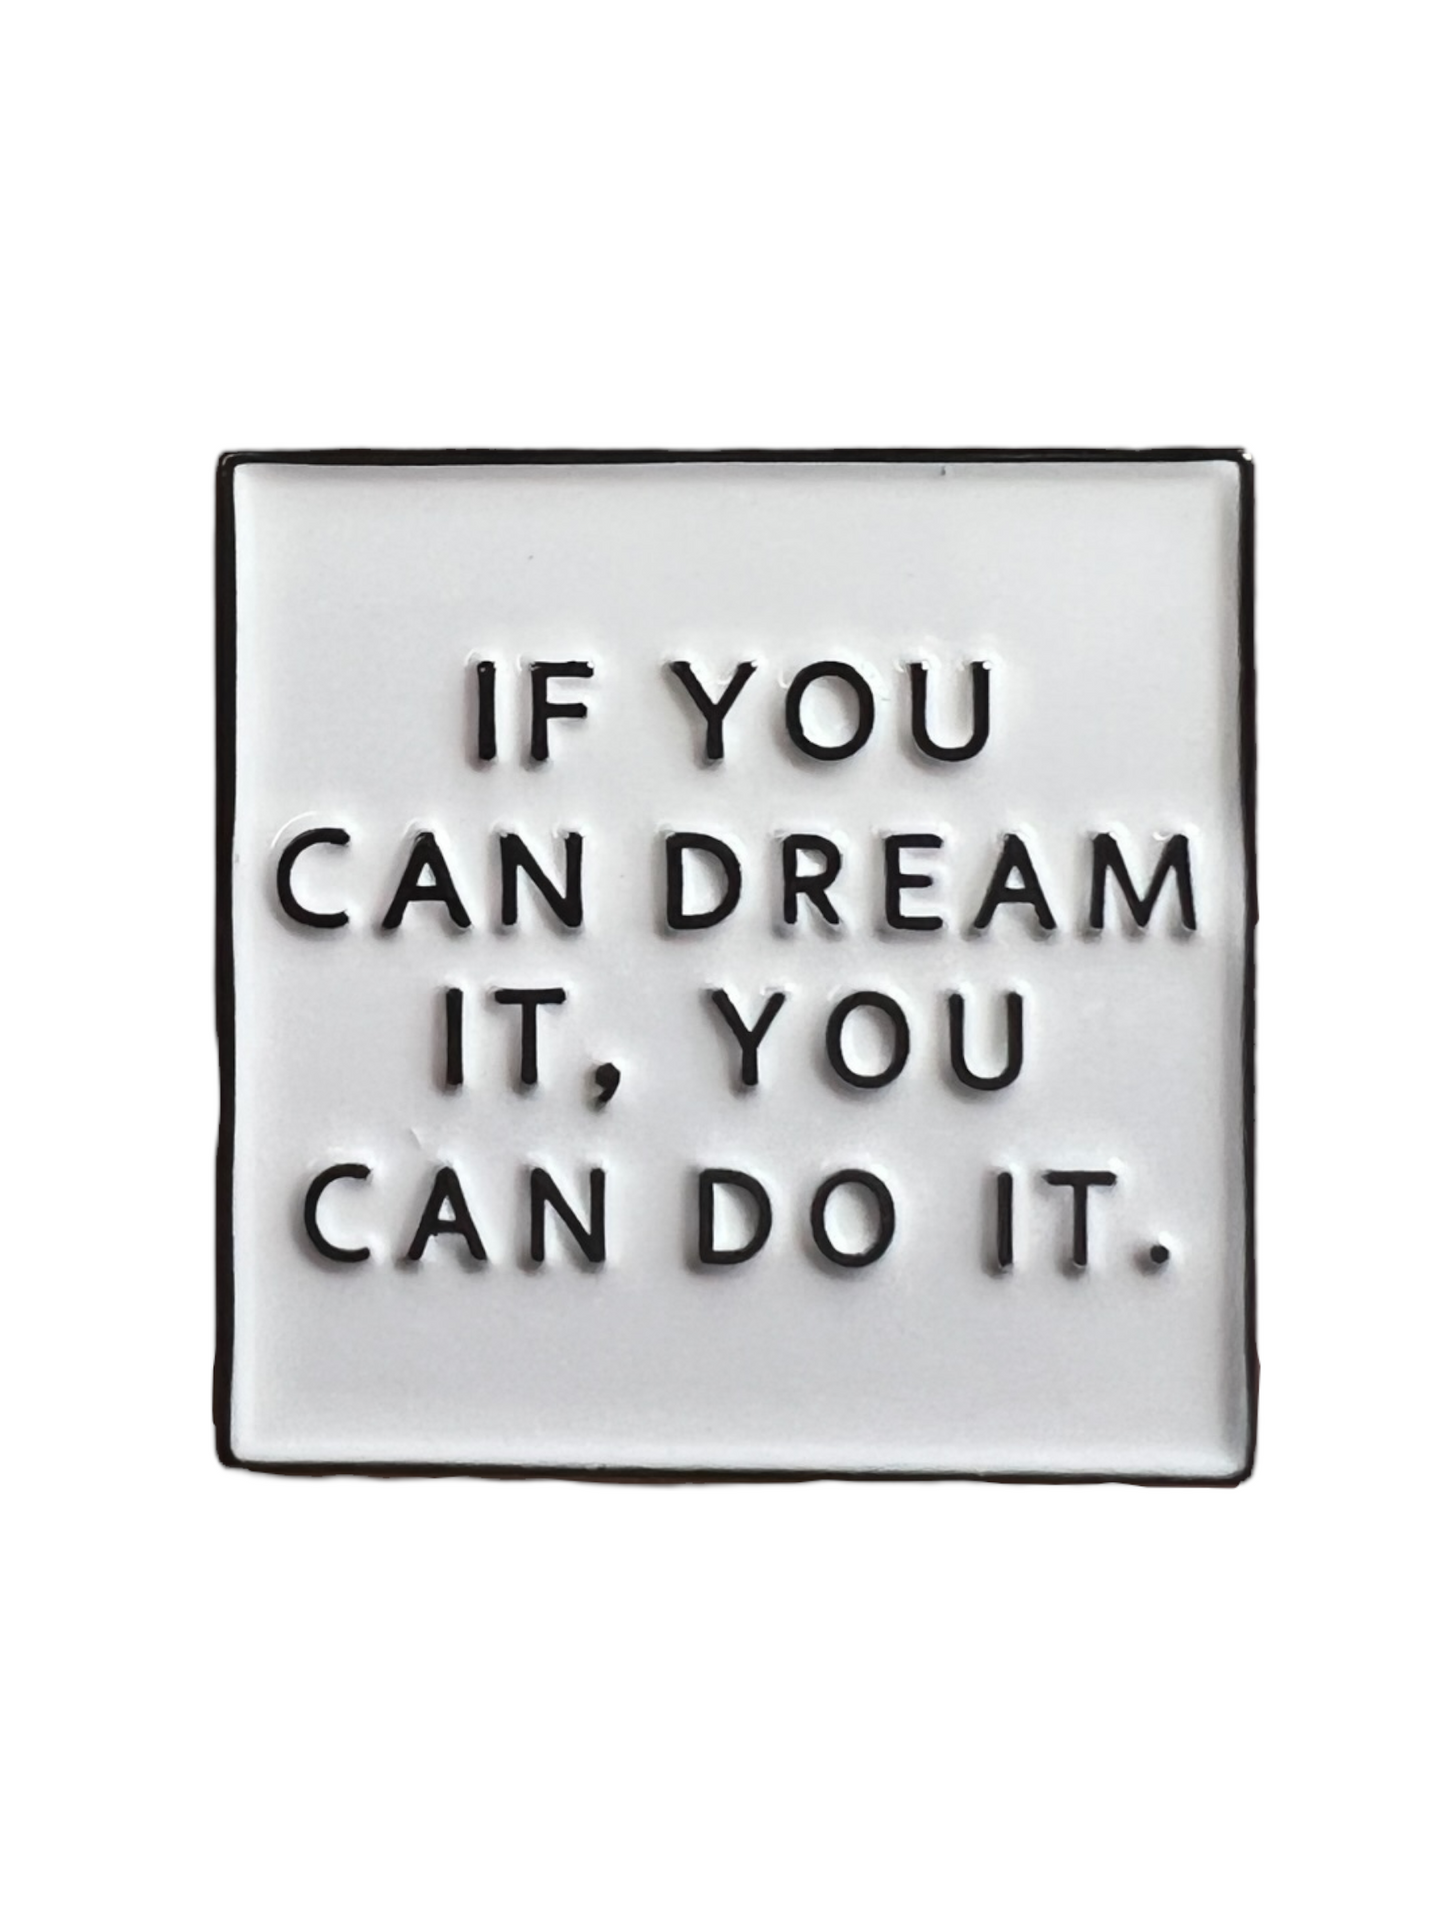 Pin — 'If You Can Dream It, You Can Do It'  SPIRIT SPARKPLUGS If You Can Dream It, You Can Do It  